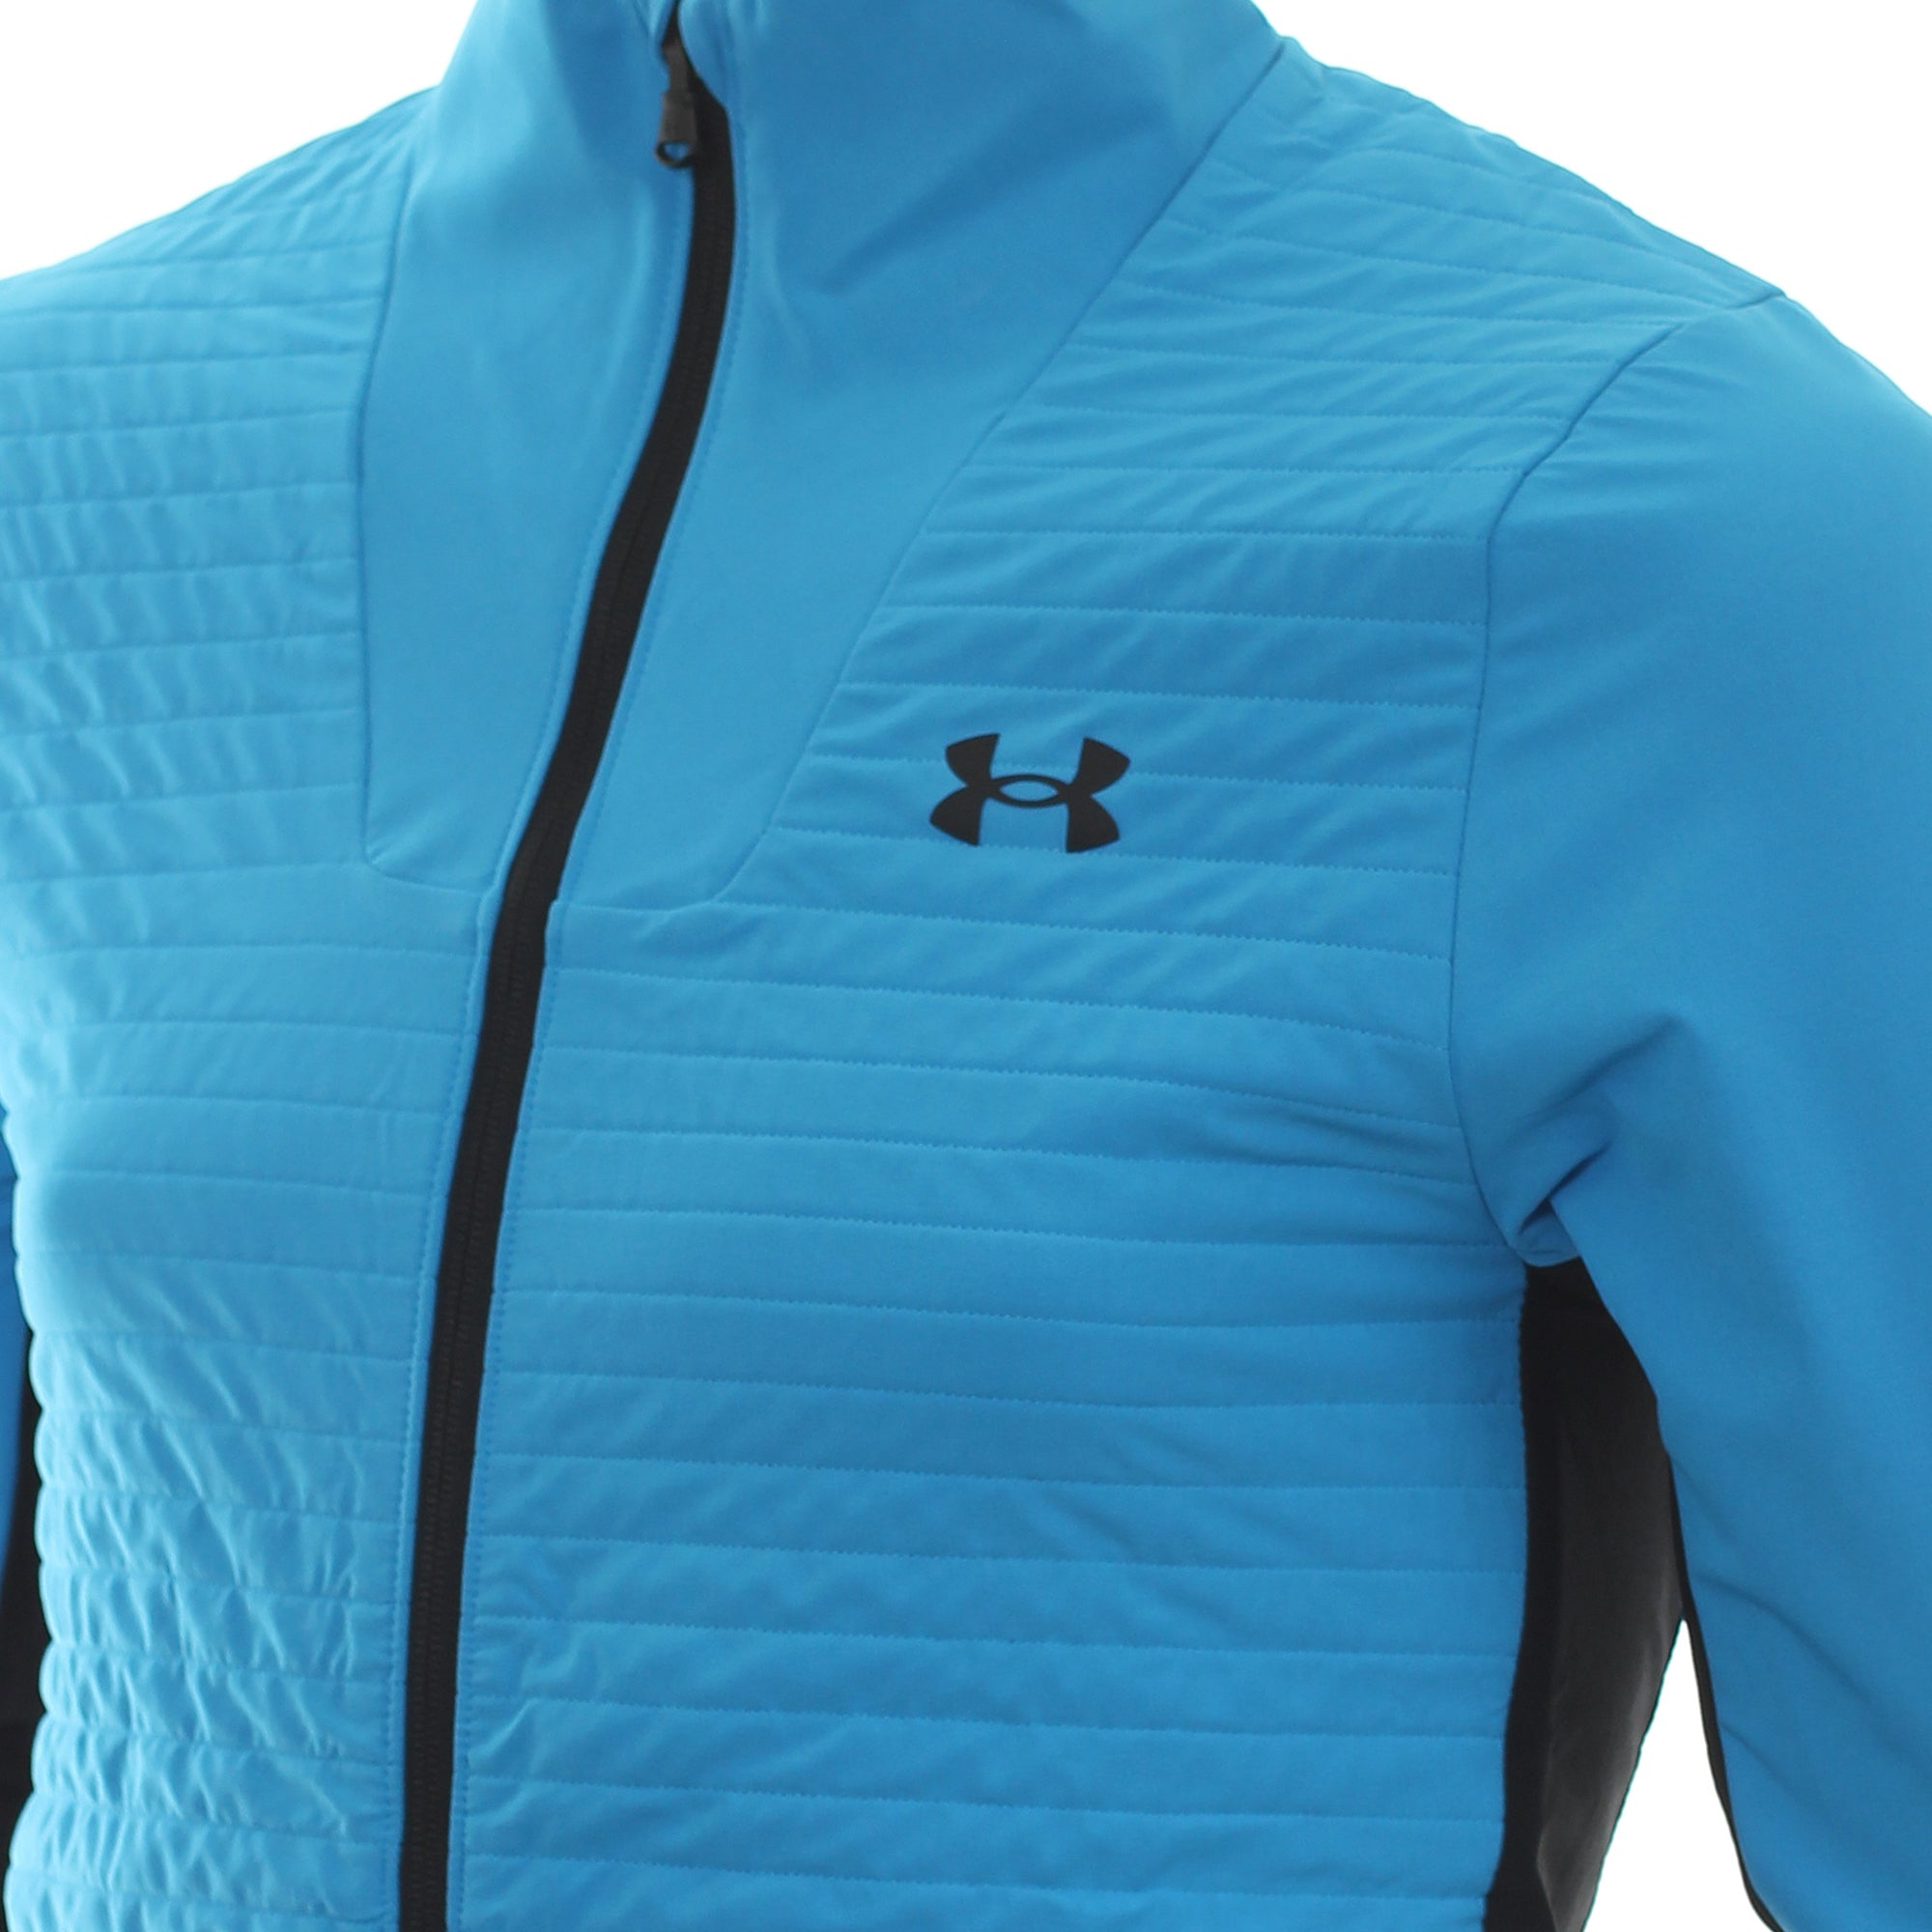 Under Armour Golf Storm Revo Jacket 1356668 Electric Blue 428 & Function18